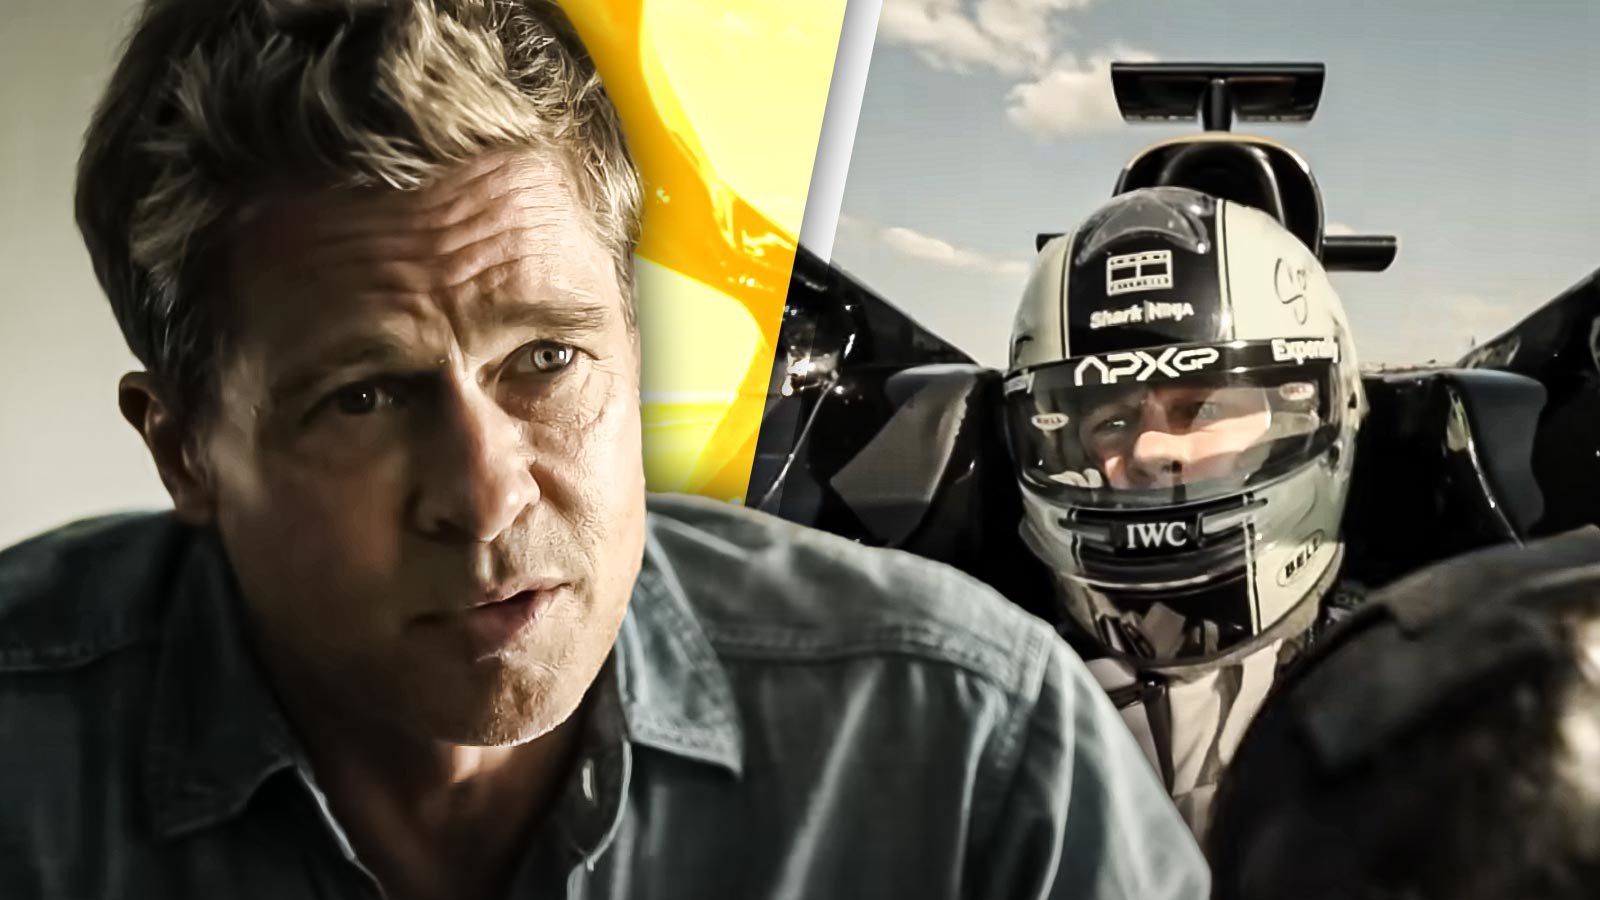 “There’s my star of the movie”: Brad Pitt’s ‘F1’ is Already Winning Over its Haters Thanks to One Million Dollar Cameo